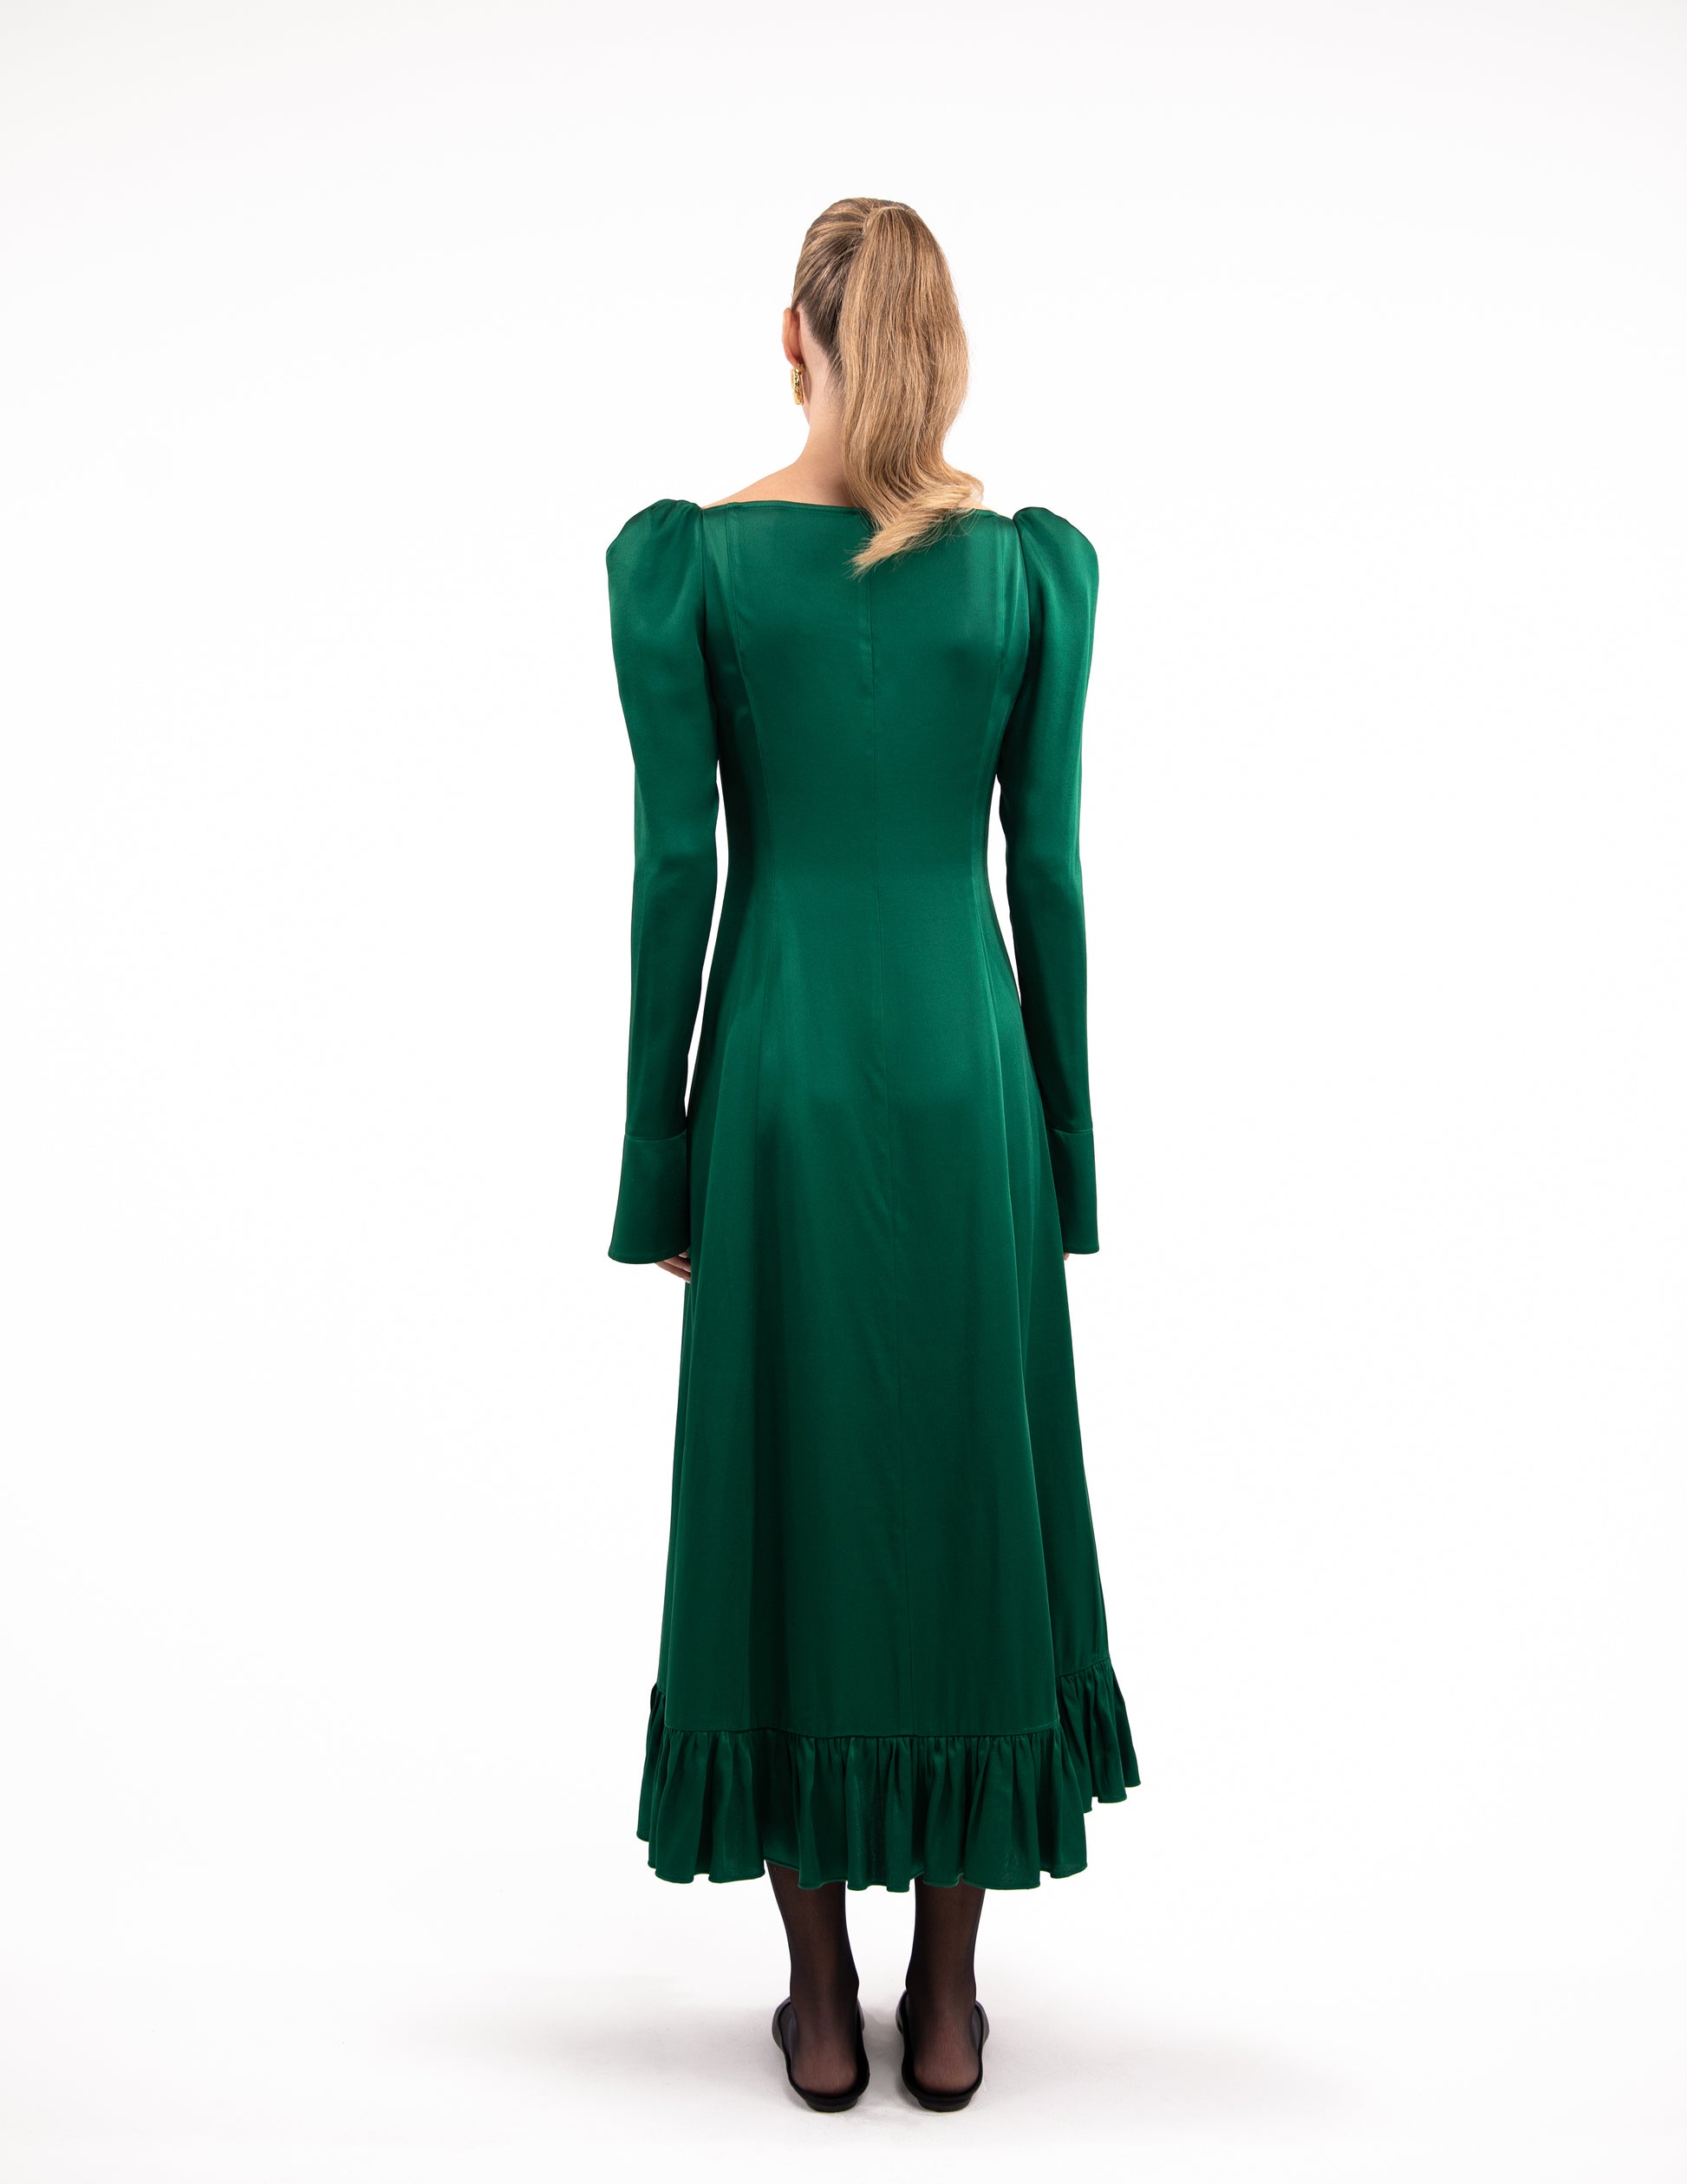 The Irish Twin - The Nori Long - Hostwear - emerald green viscose dress - viscose fabric  - chiccest hostess - Made in France - Made in Paris - Handmade in Paris - Designed in Paris - Handcrafted - Be my Guest - Made to love and to last - Unique piece made by hand - original and special for Host Wear by The Irish Twin - created by Jill Bauwens